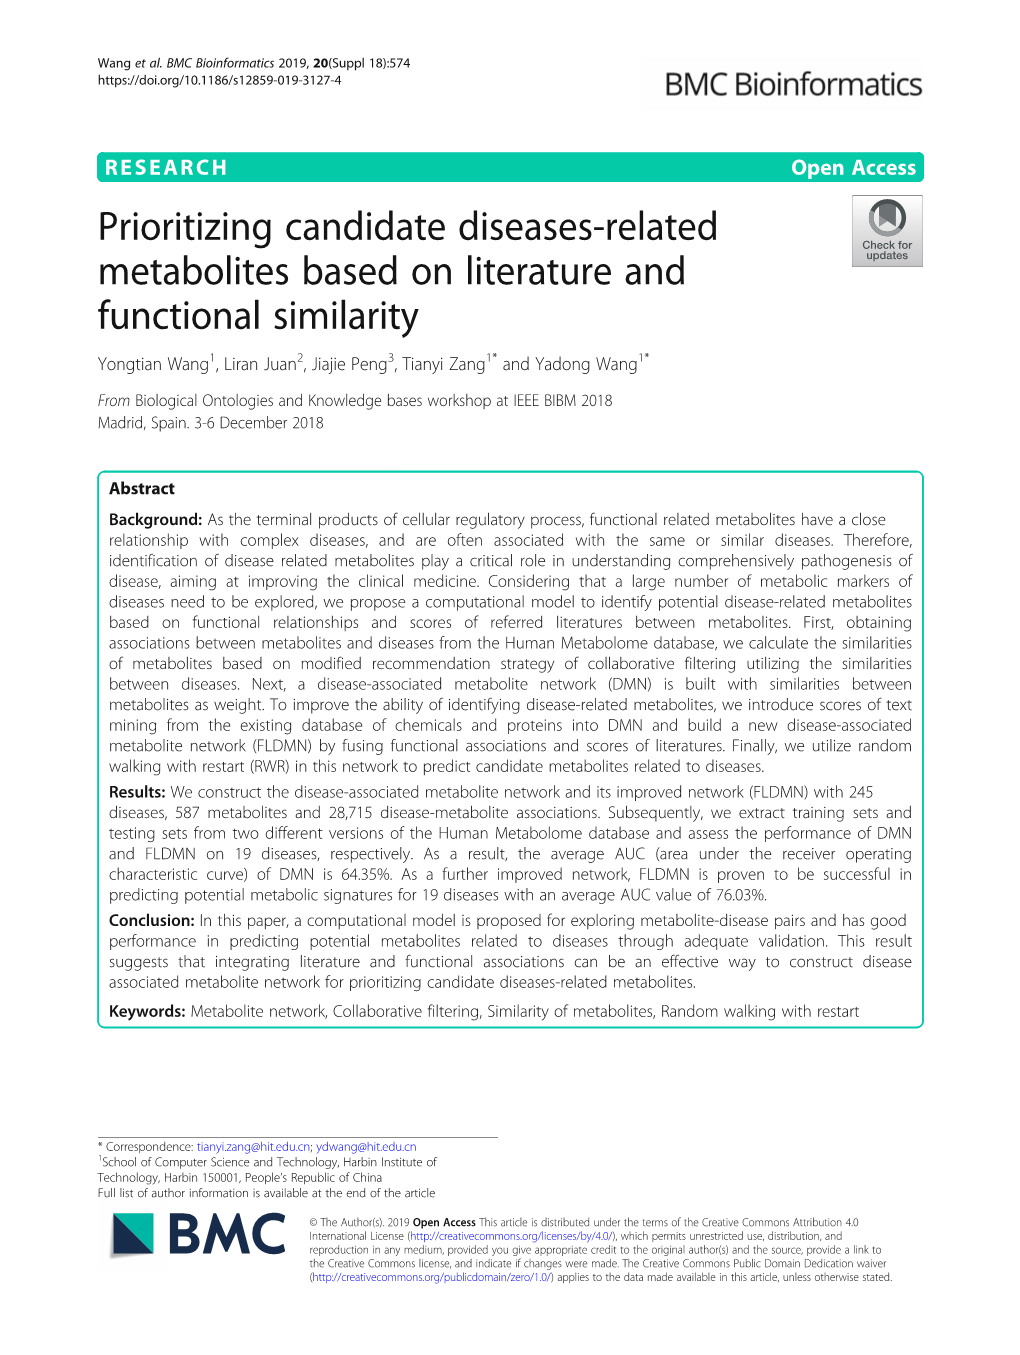 Prioritizing Candidate Diseases-Related Metabolites Based